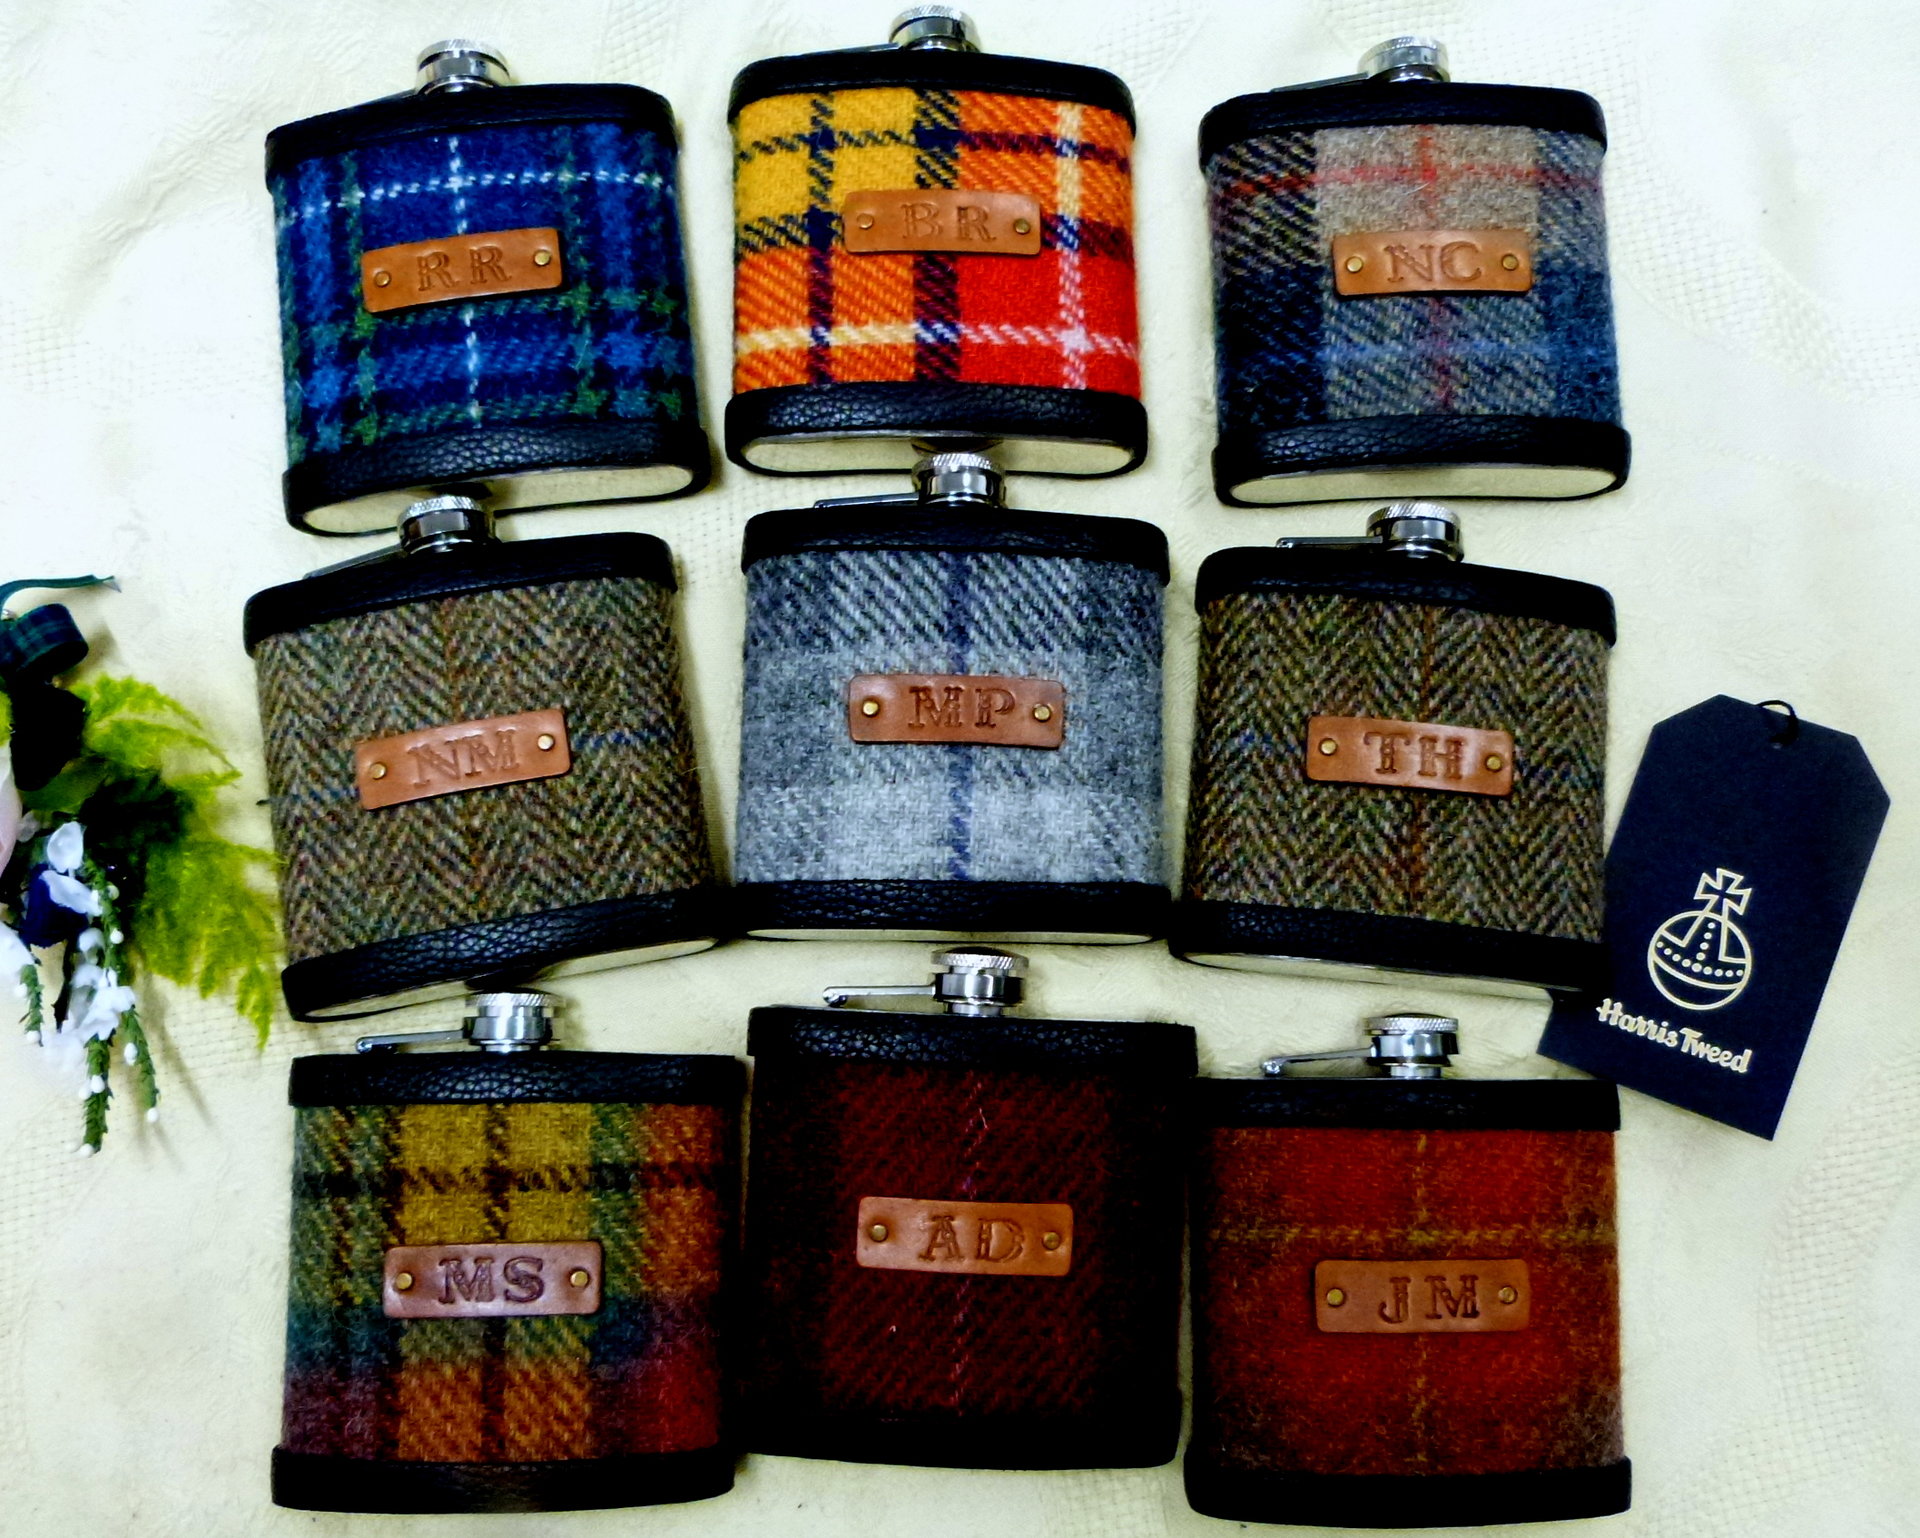 Harris Tweed  Hip Flasks  with initials embossed on black or brown leather labels for Best Man,  Father of Bride or groomsmen, Scottish luxury gift sets of 3-6